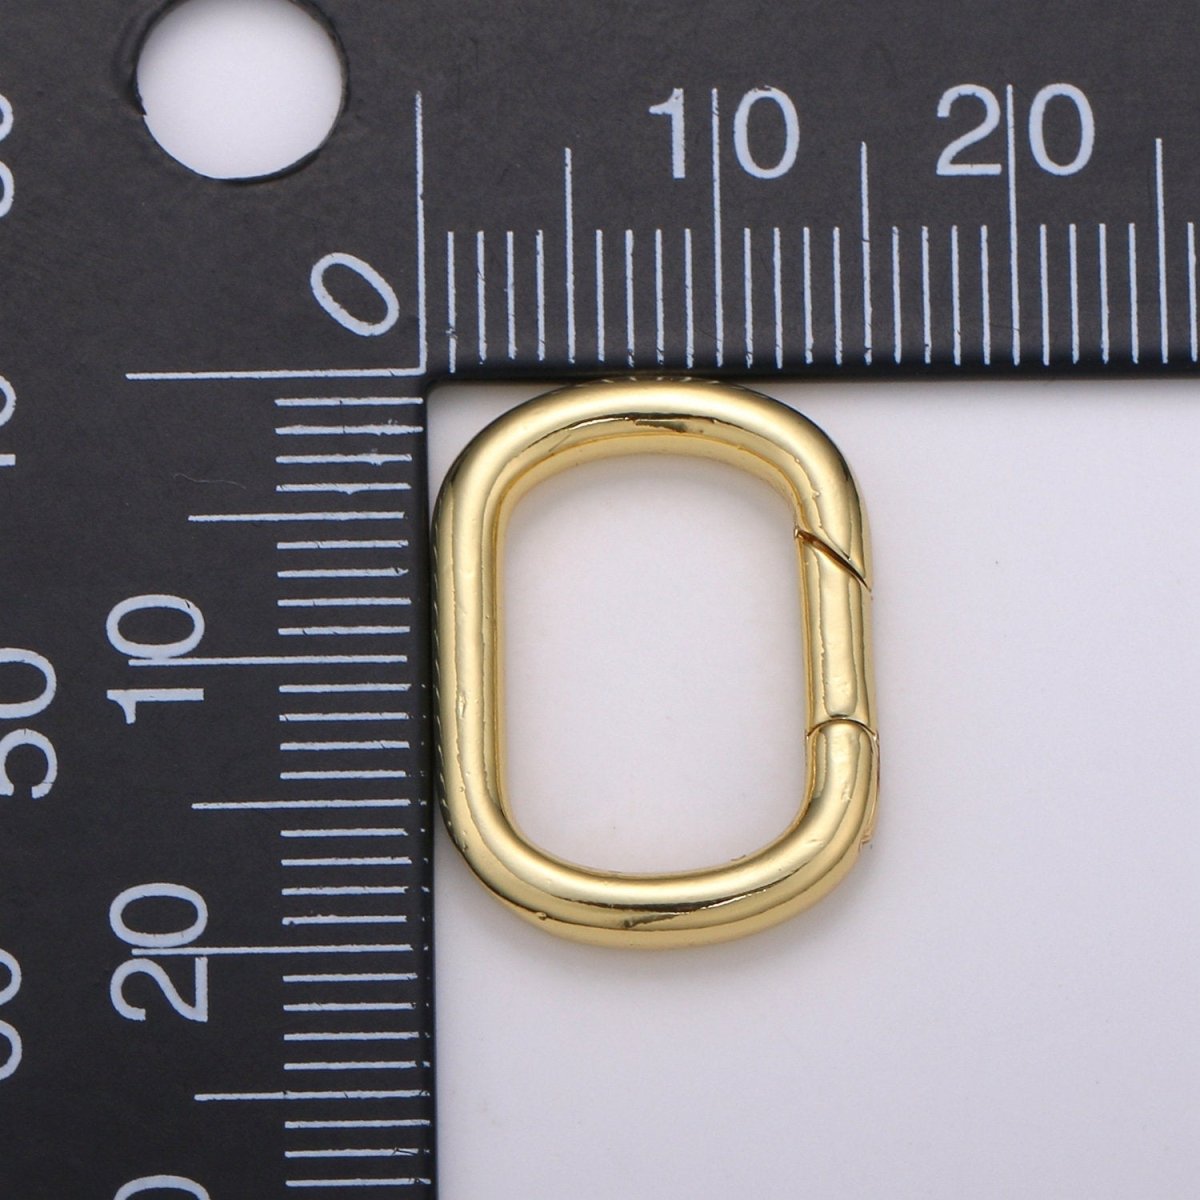 Dainty Gold Spring Gate Ring, Push Gate ring, 15x20mm Oval Ring, Charm Holder 14K Gold Filled Clasp for Charm Holder Connector L-004 - DLUXCA